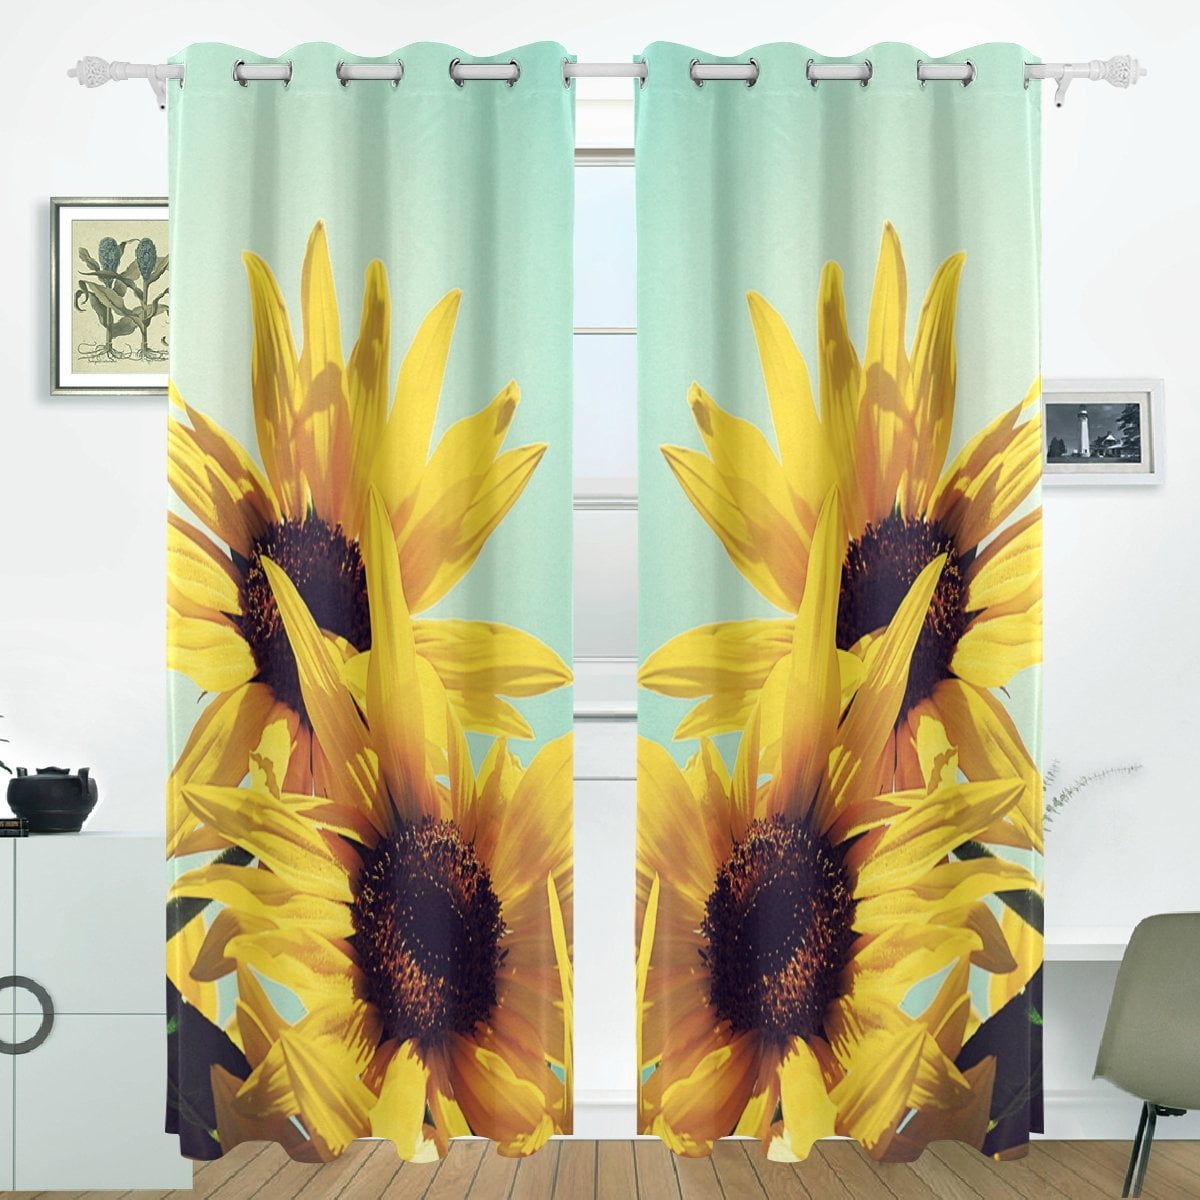 3D Blockout Photo Printing Curtain Sunflower White Drapes Fabric Window Curtains 